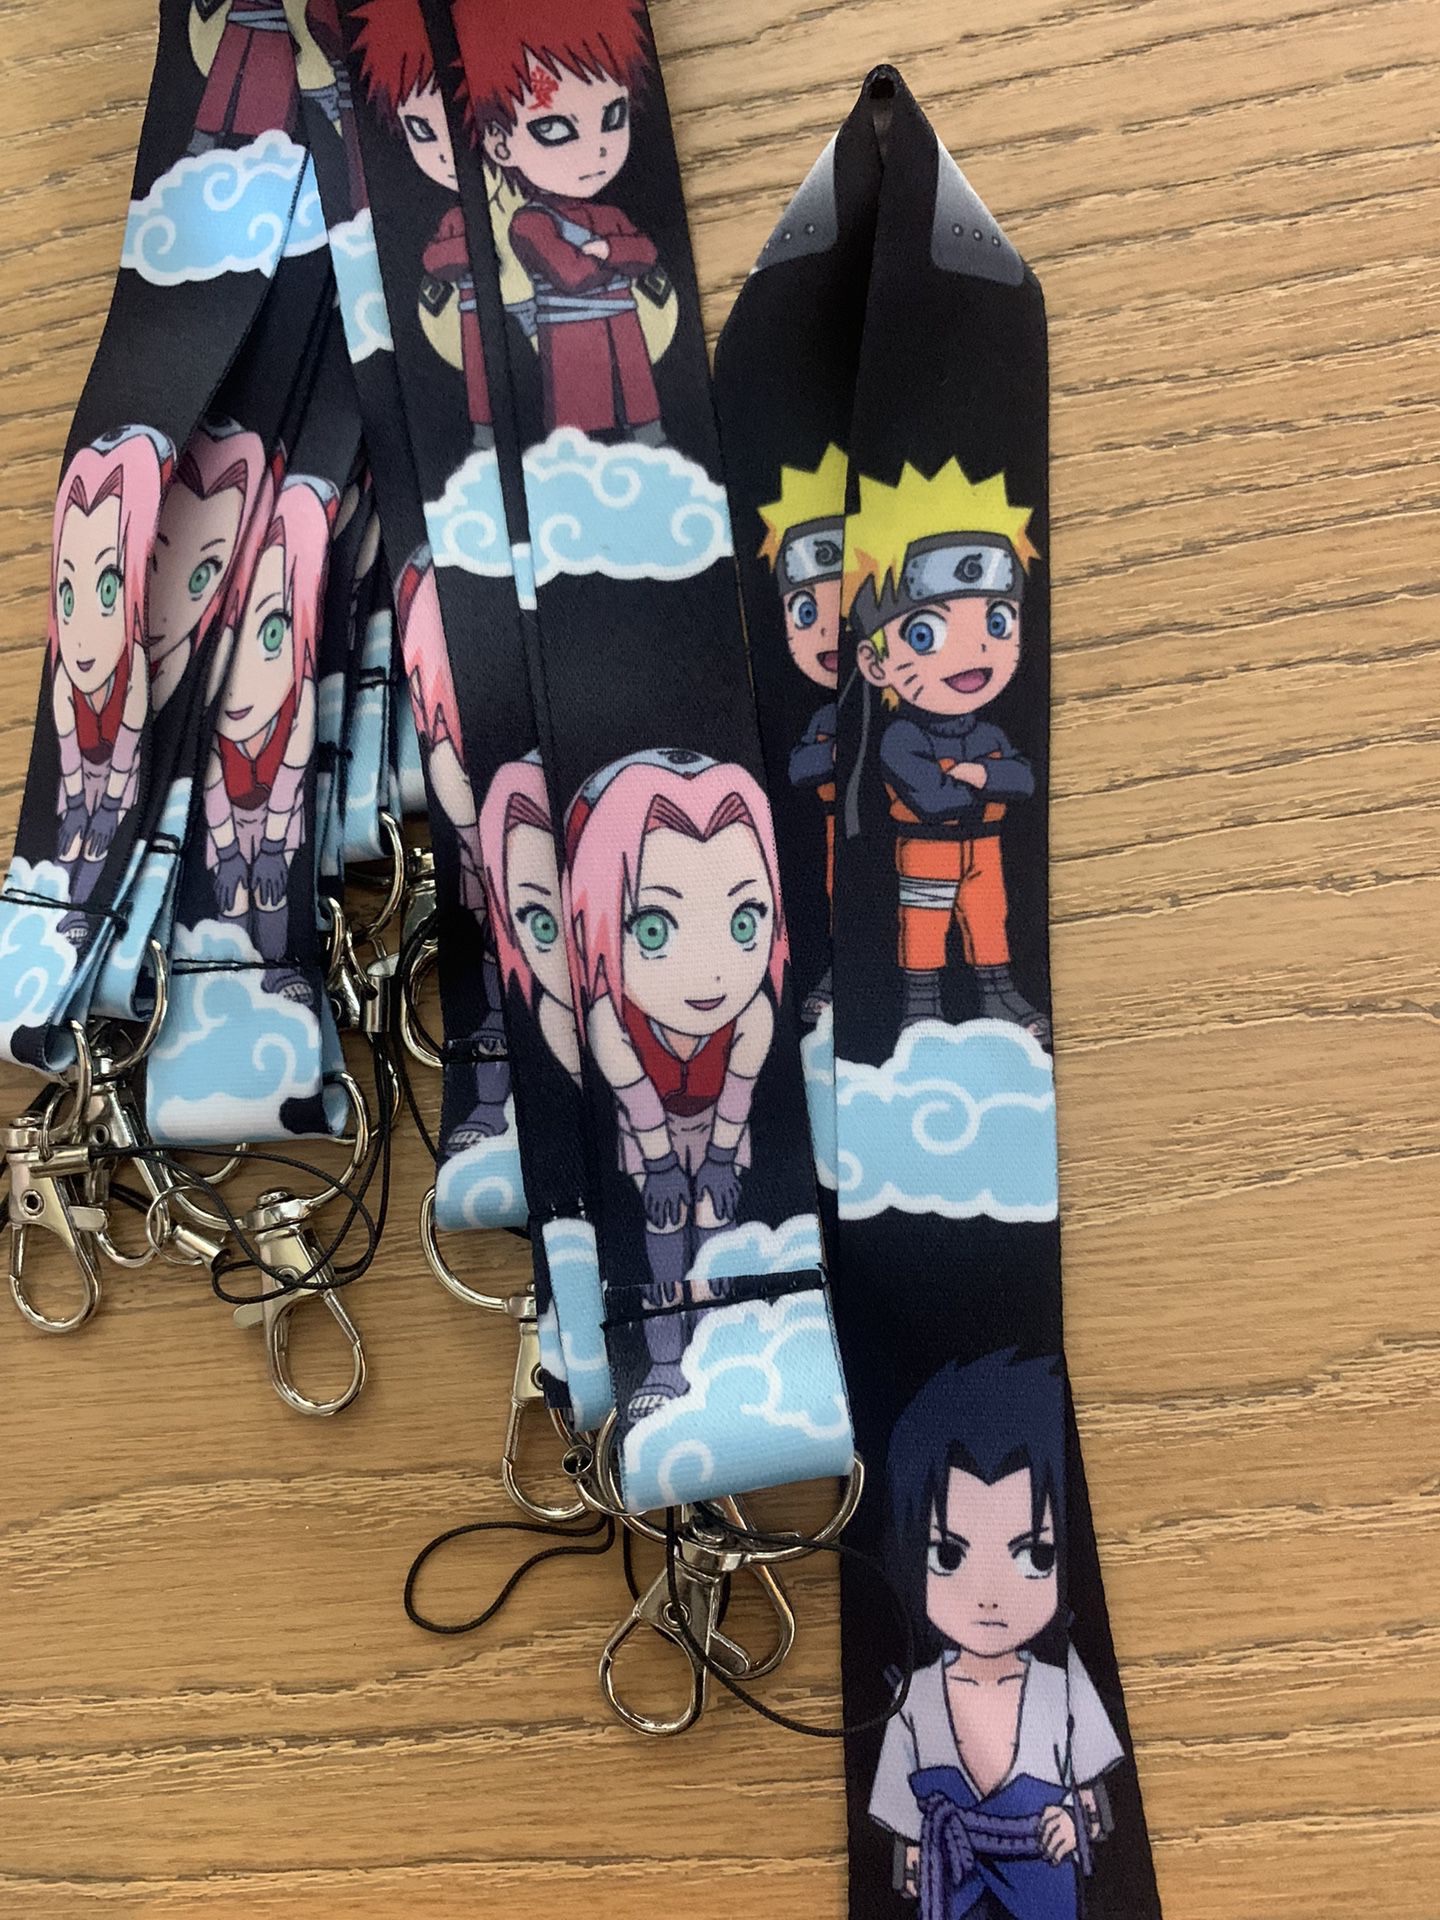 Lanyard's  -  Price For Each 